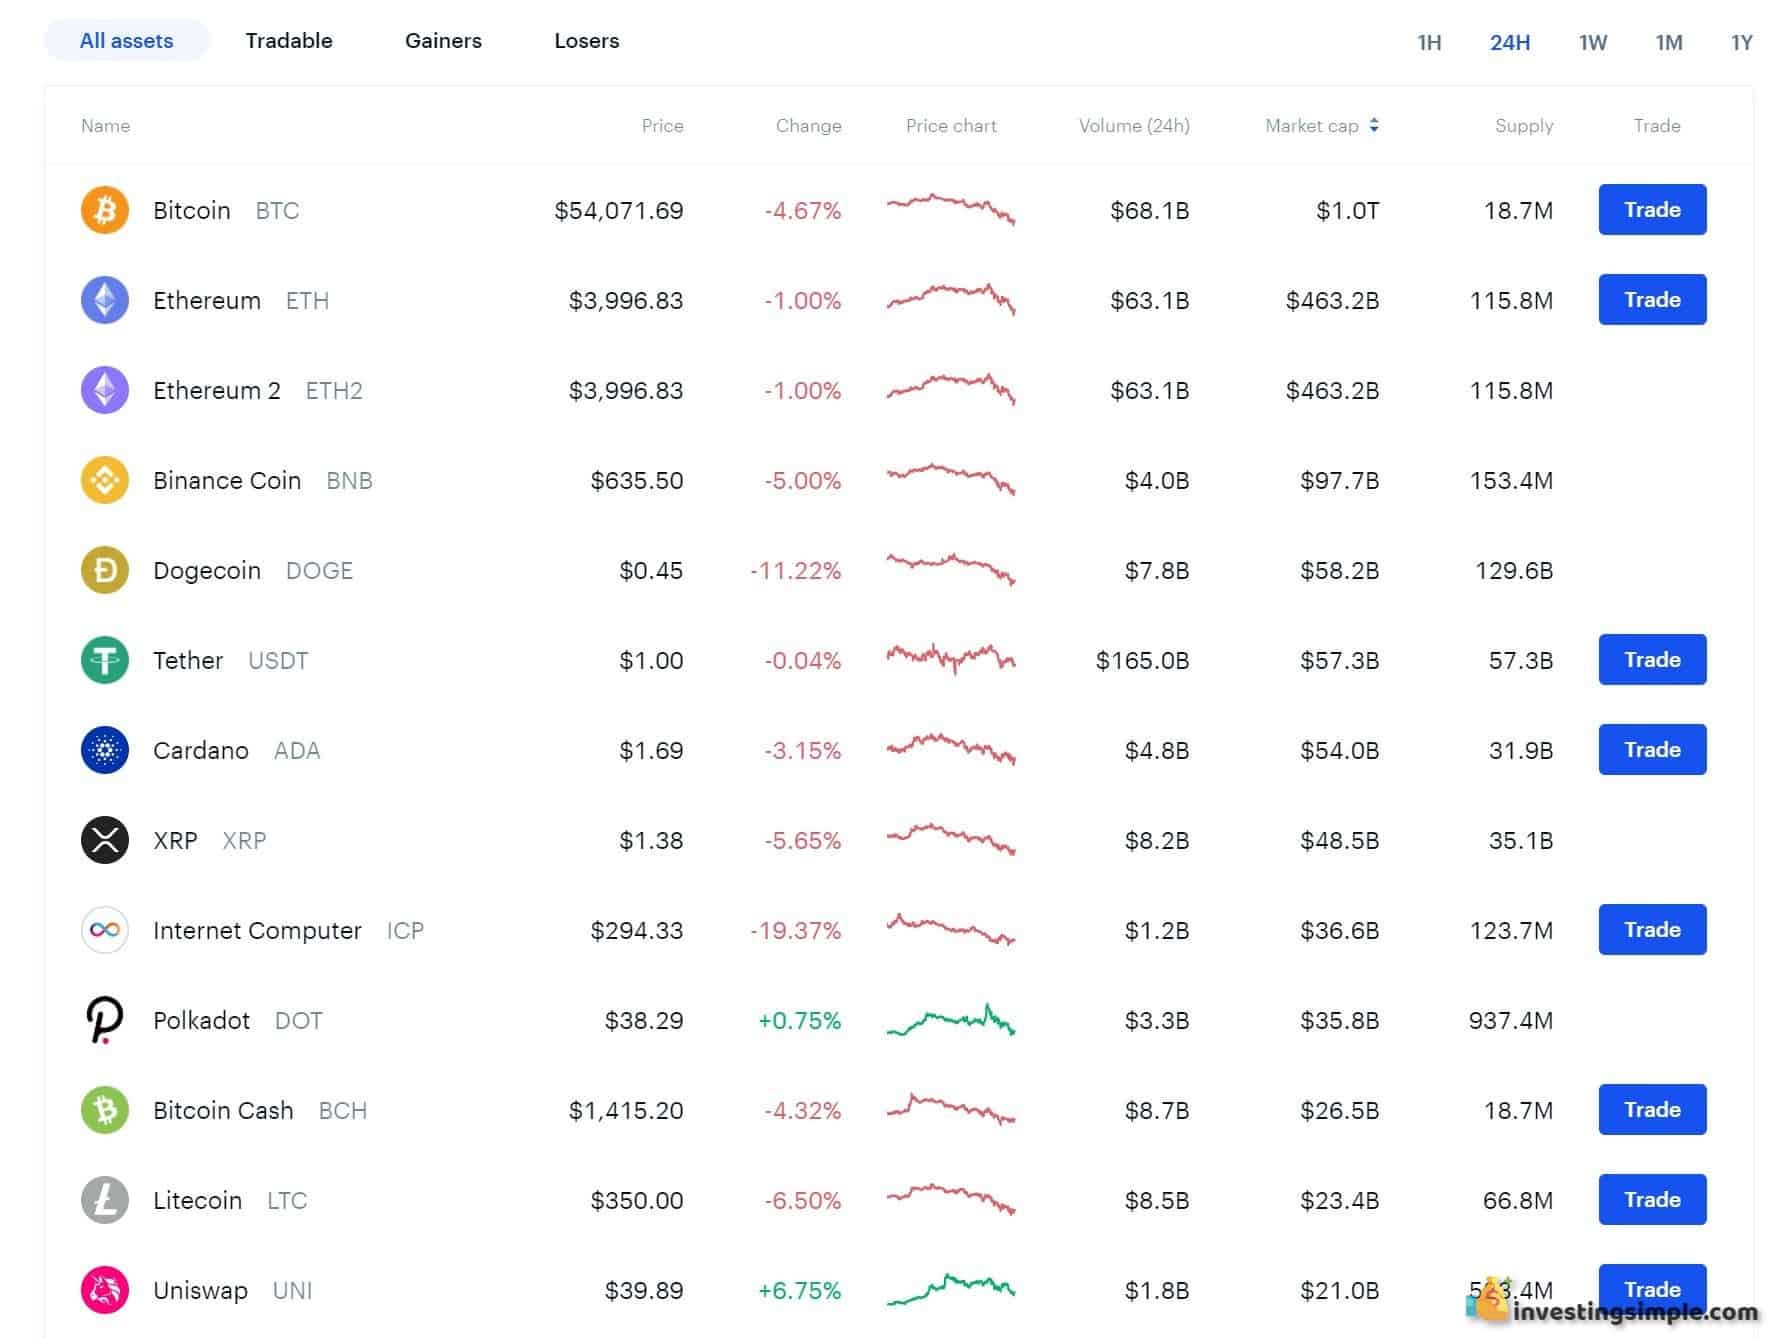 coinbase and crypto.com different prices